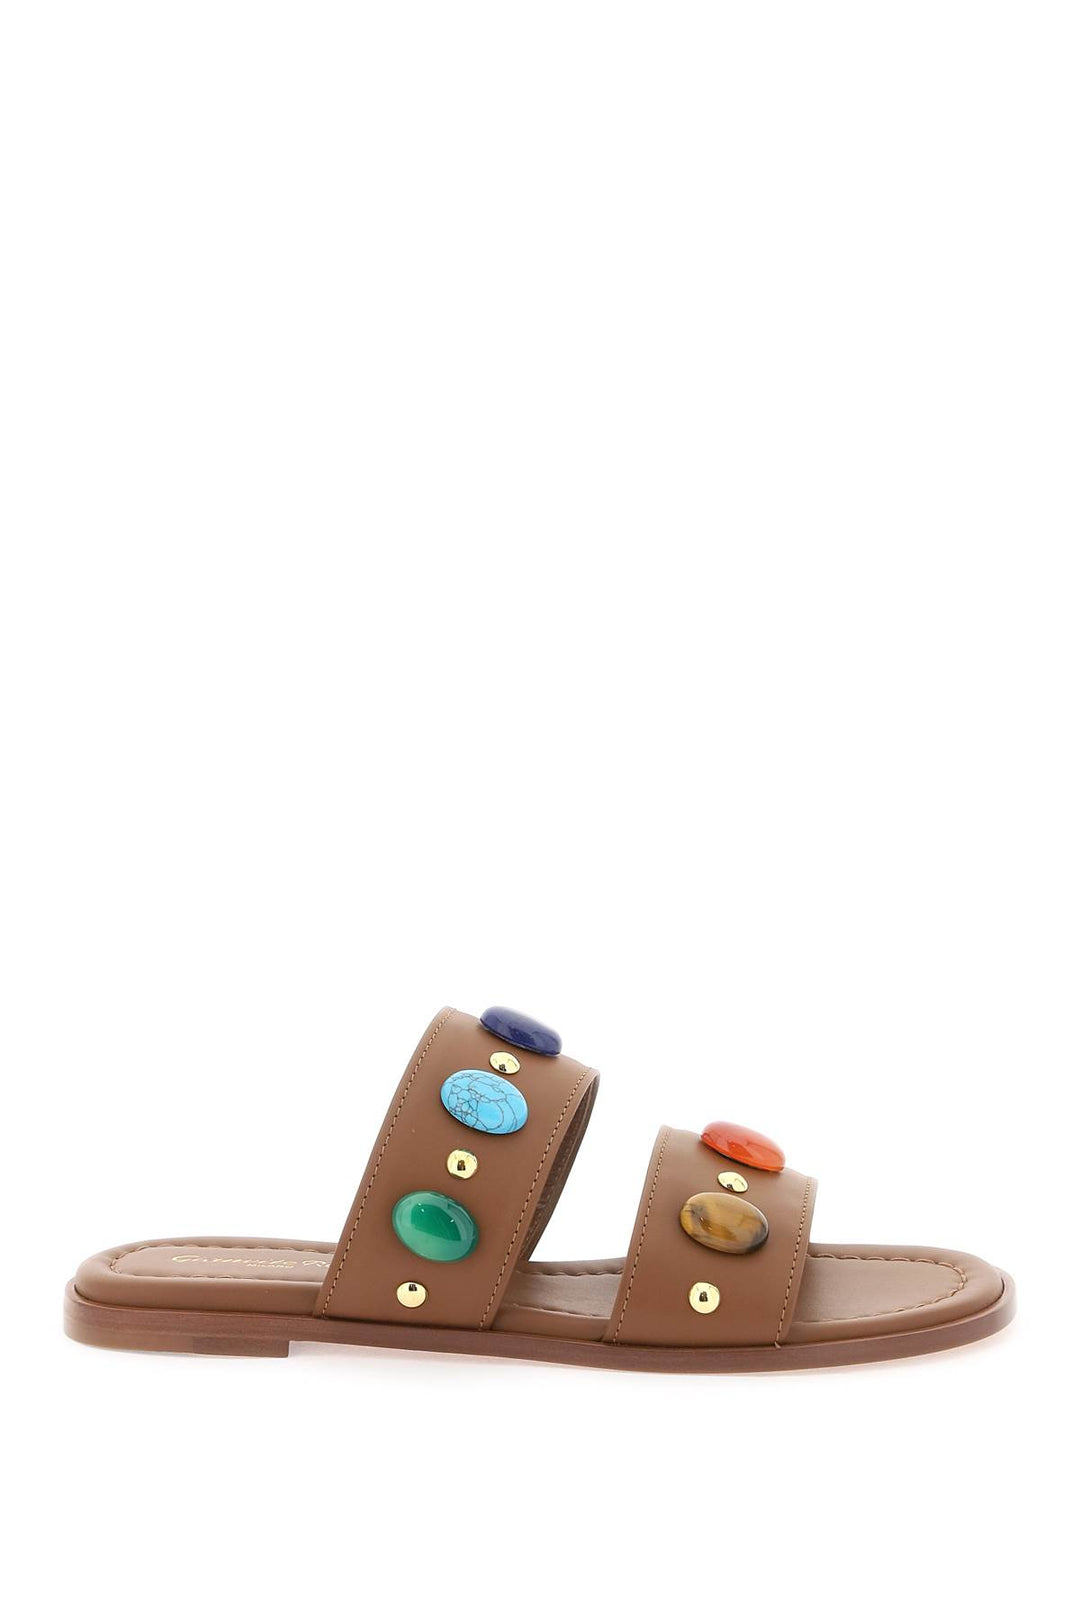 Gianvito Rossi Slides With Natural Stone Embellishment   Brown